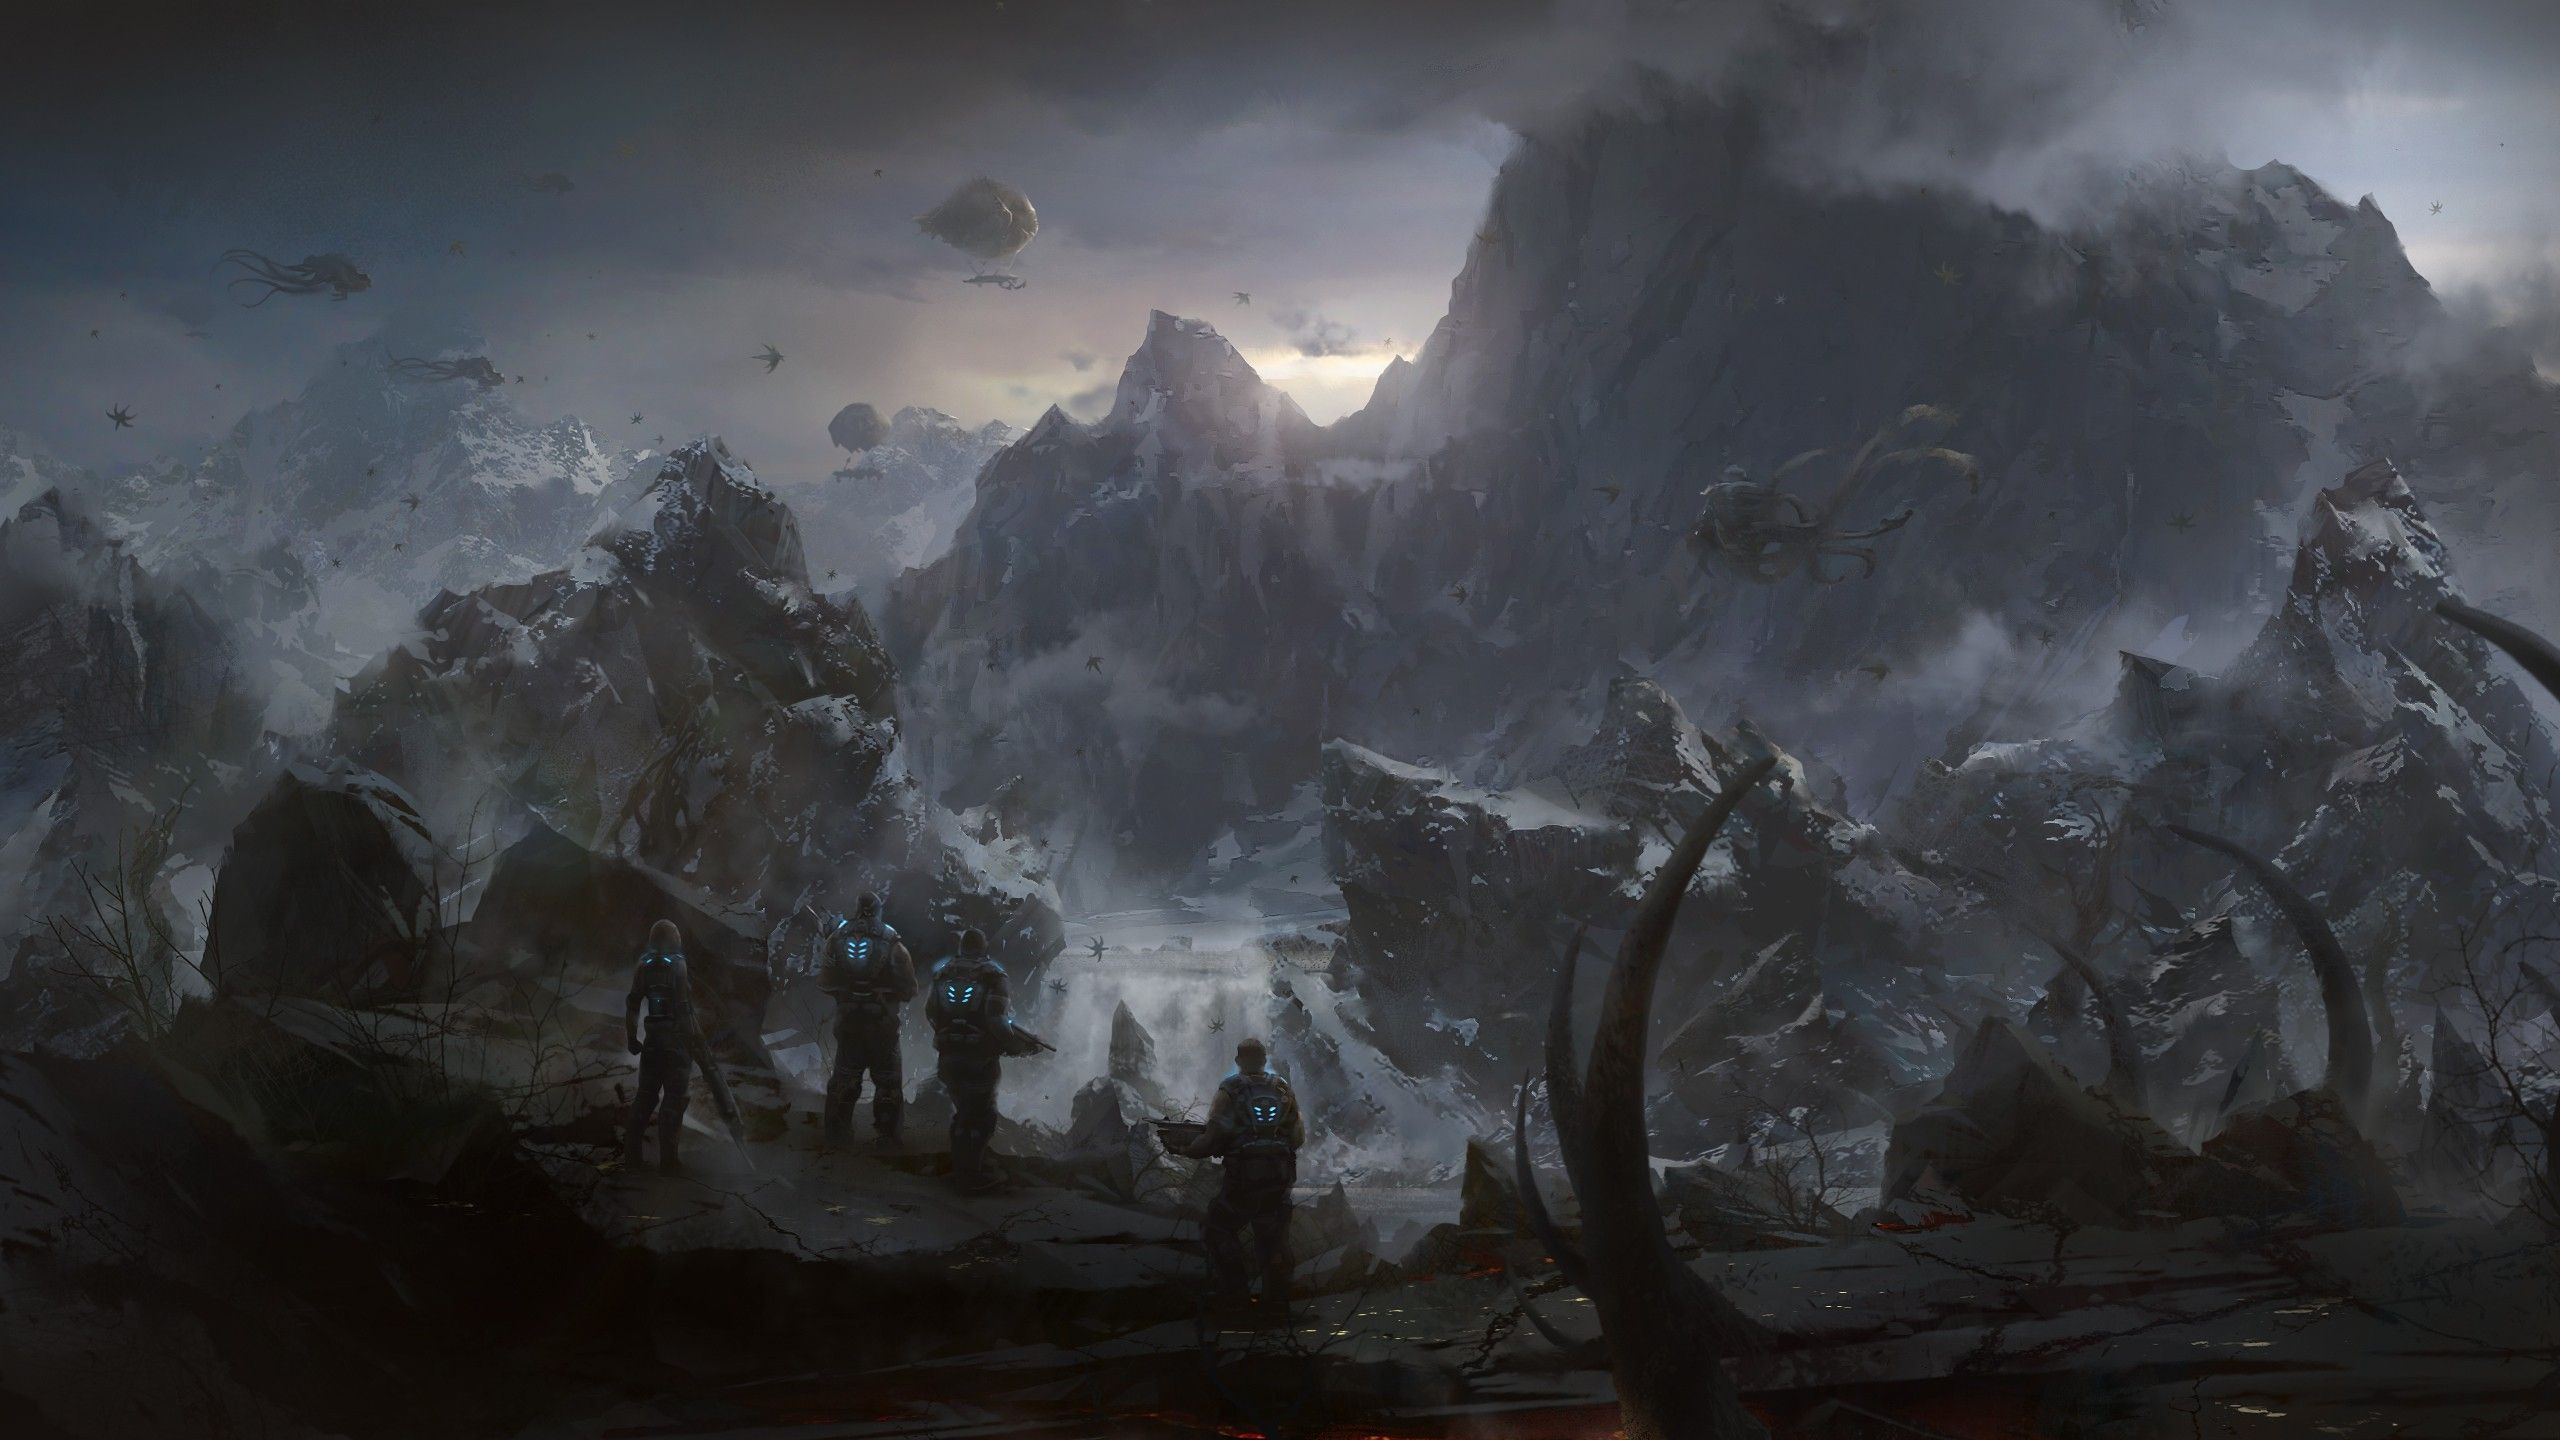 Download Wallpaper 2560x1440 Gears of war, Mountains, Soldiers